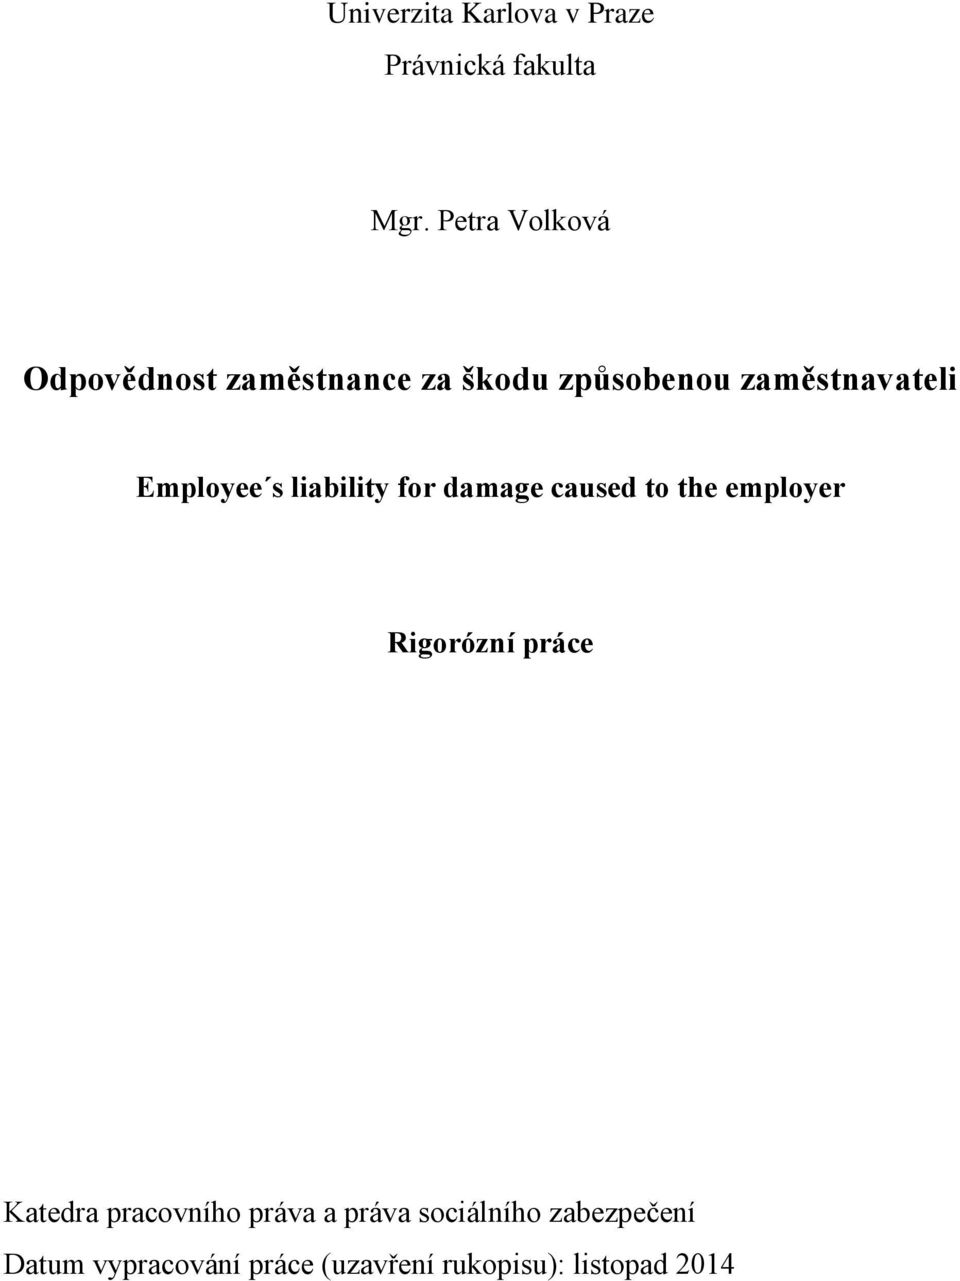 Employee s liability for damage caused to the employer Rigorózní práce